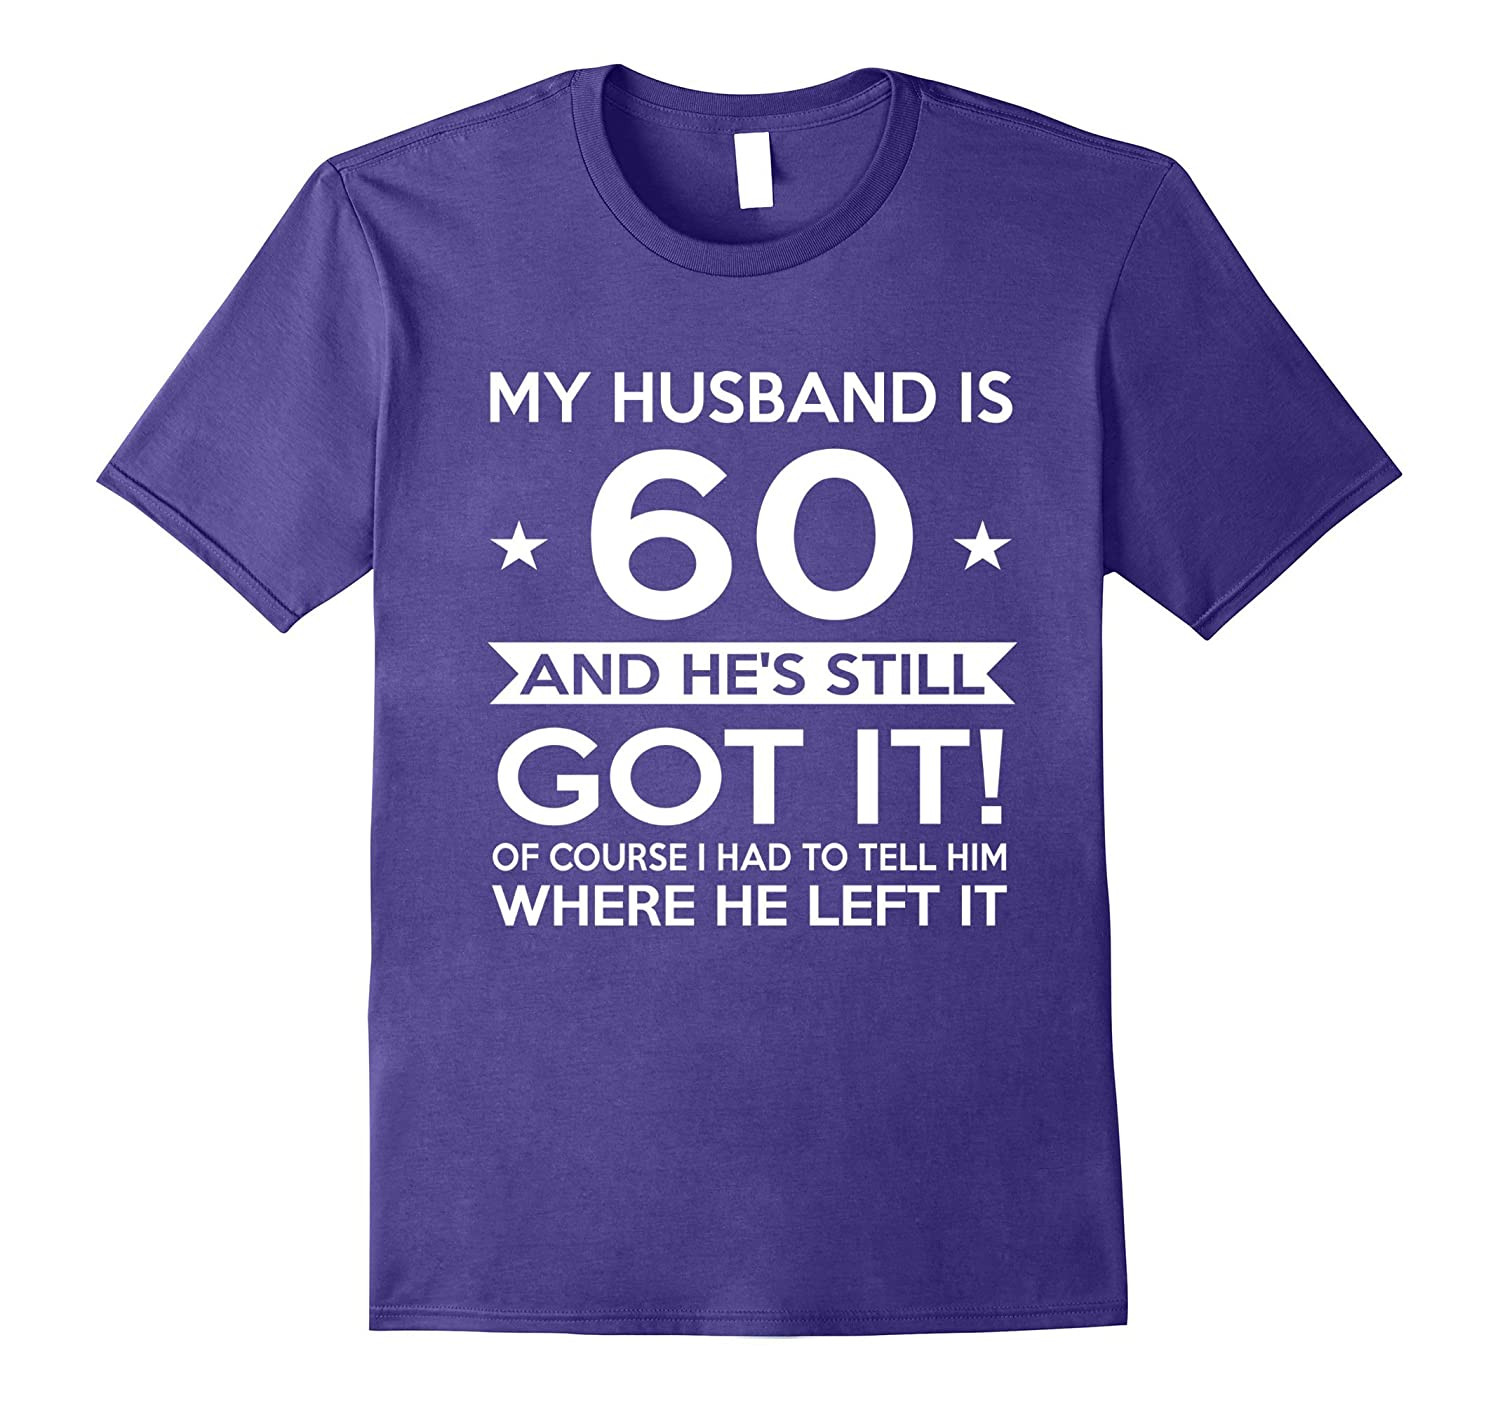 Ideas For Husbands Birthday Gift
 My Husband is 60 60th Birthday Gift Ideas for him CL